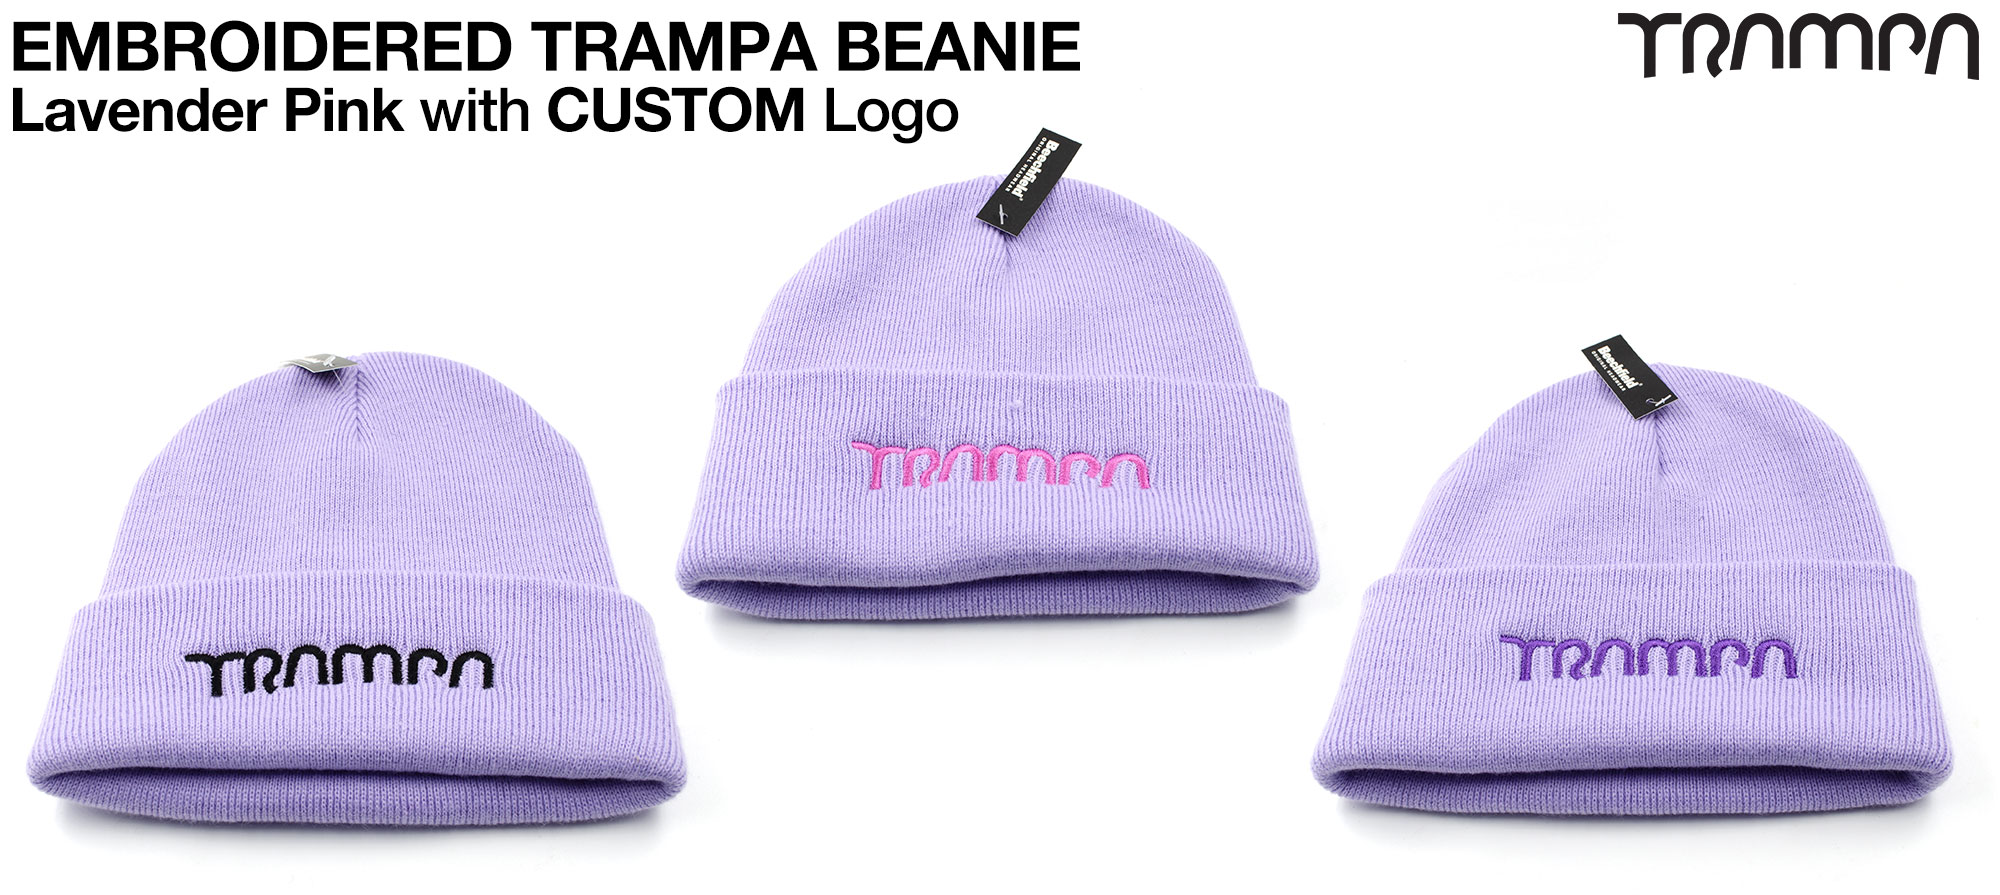 Lavender PINK Beanie with EMBROIDERED TRAMPA logo